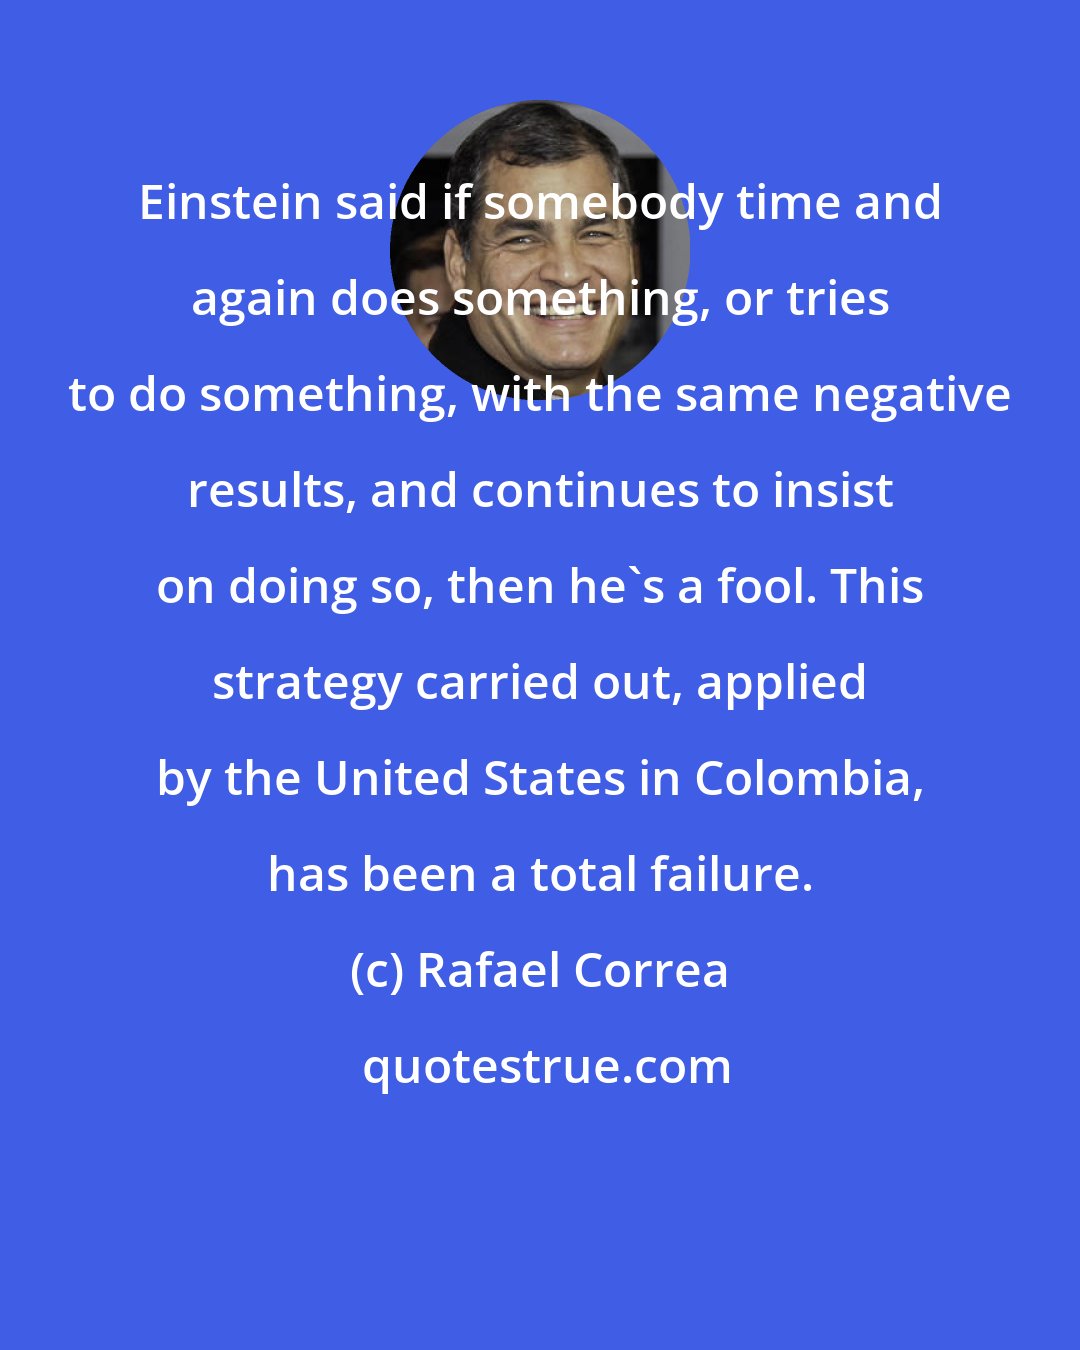 Rafael Correa: Einstein said if somebody time and again does something, or tries to do something, with the same negative results, and continues to insist on doing so, then he's a fool. This strategy carried out, applied by the United States in Colombia, has been a total failure.